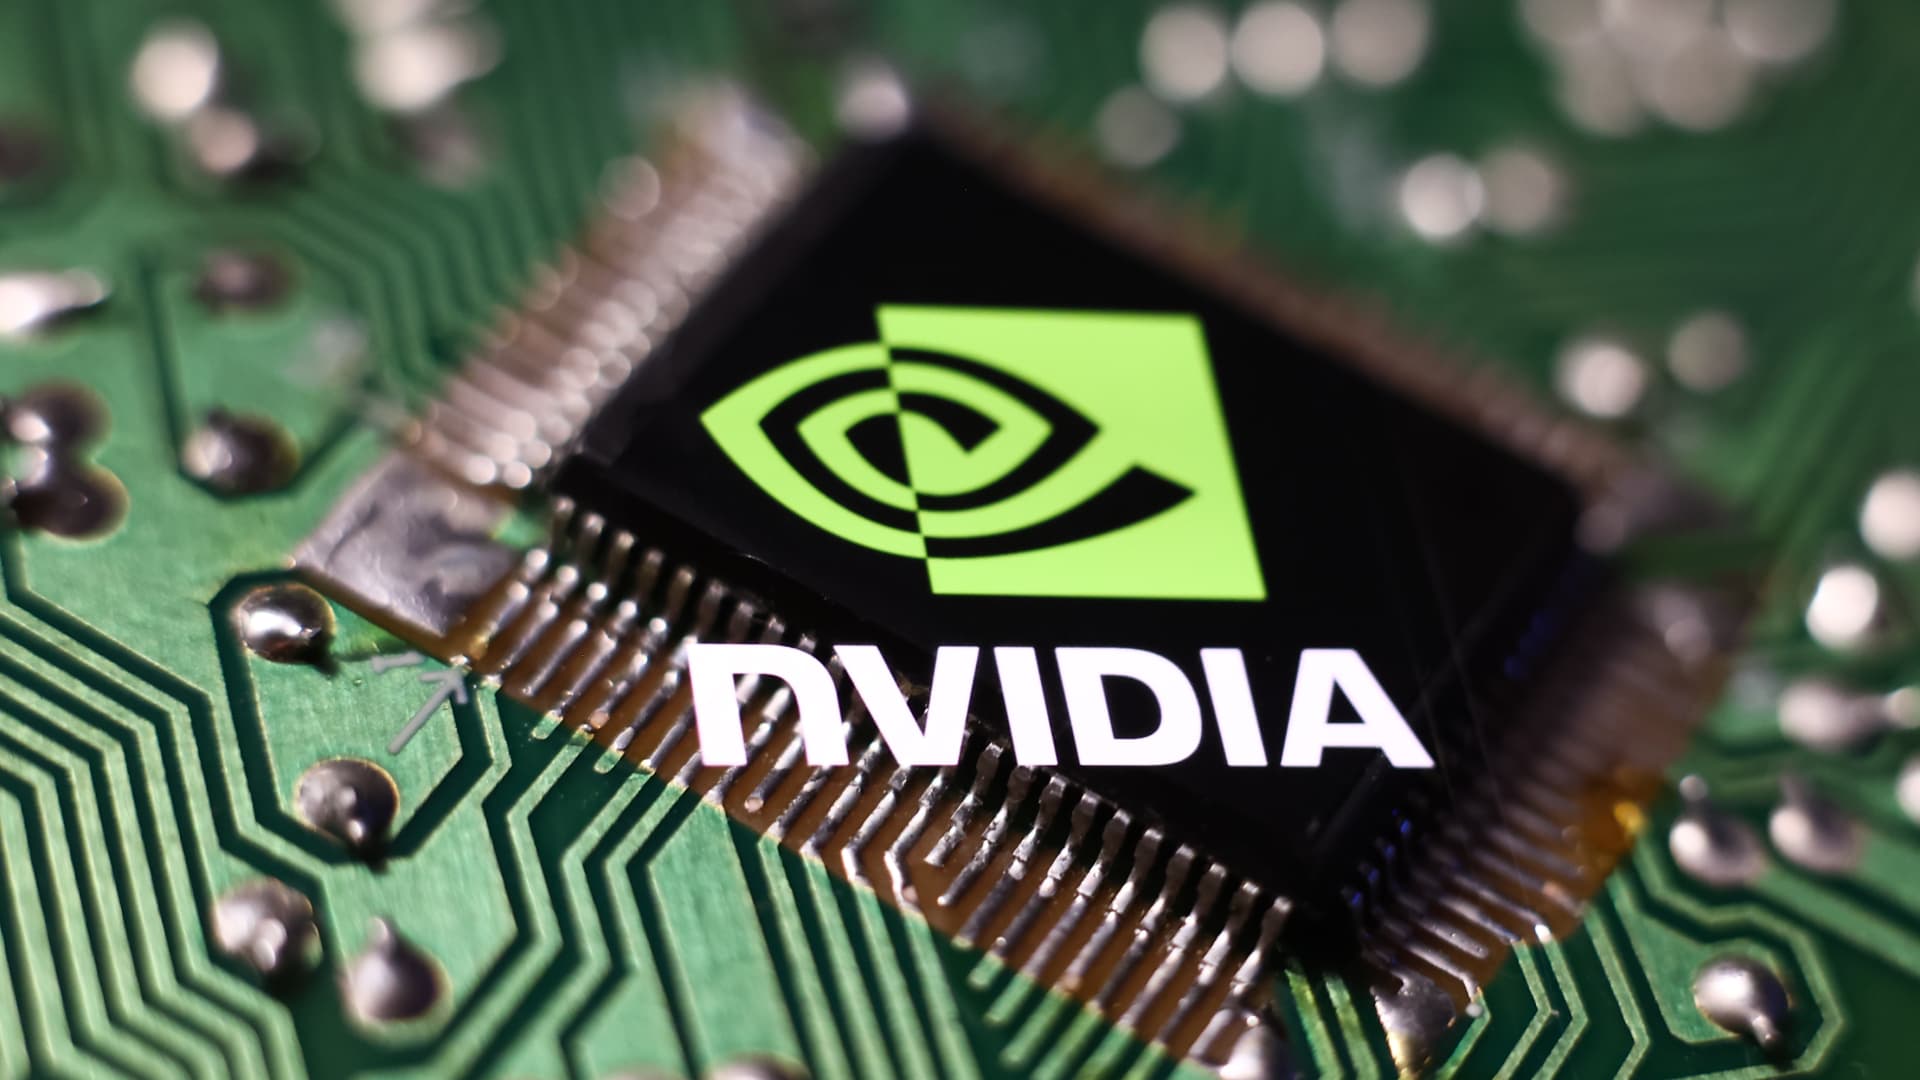 Skipped the Nvidia rally? These 10 businesses are acquiring its chips — and their stocks are rallying